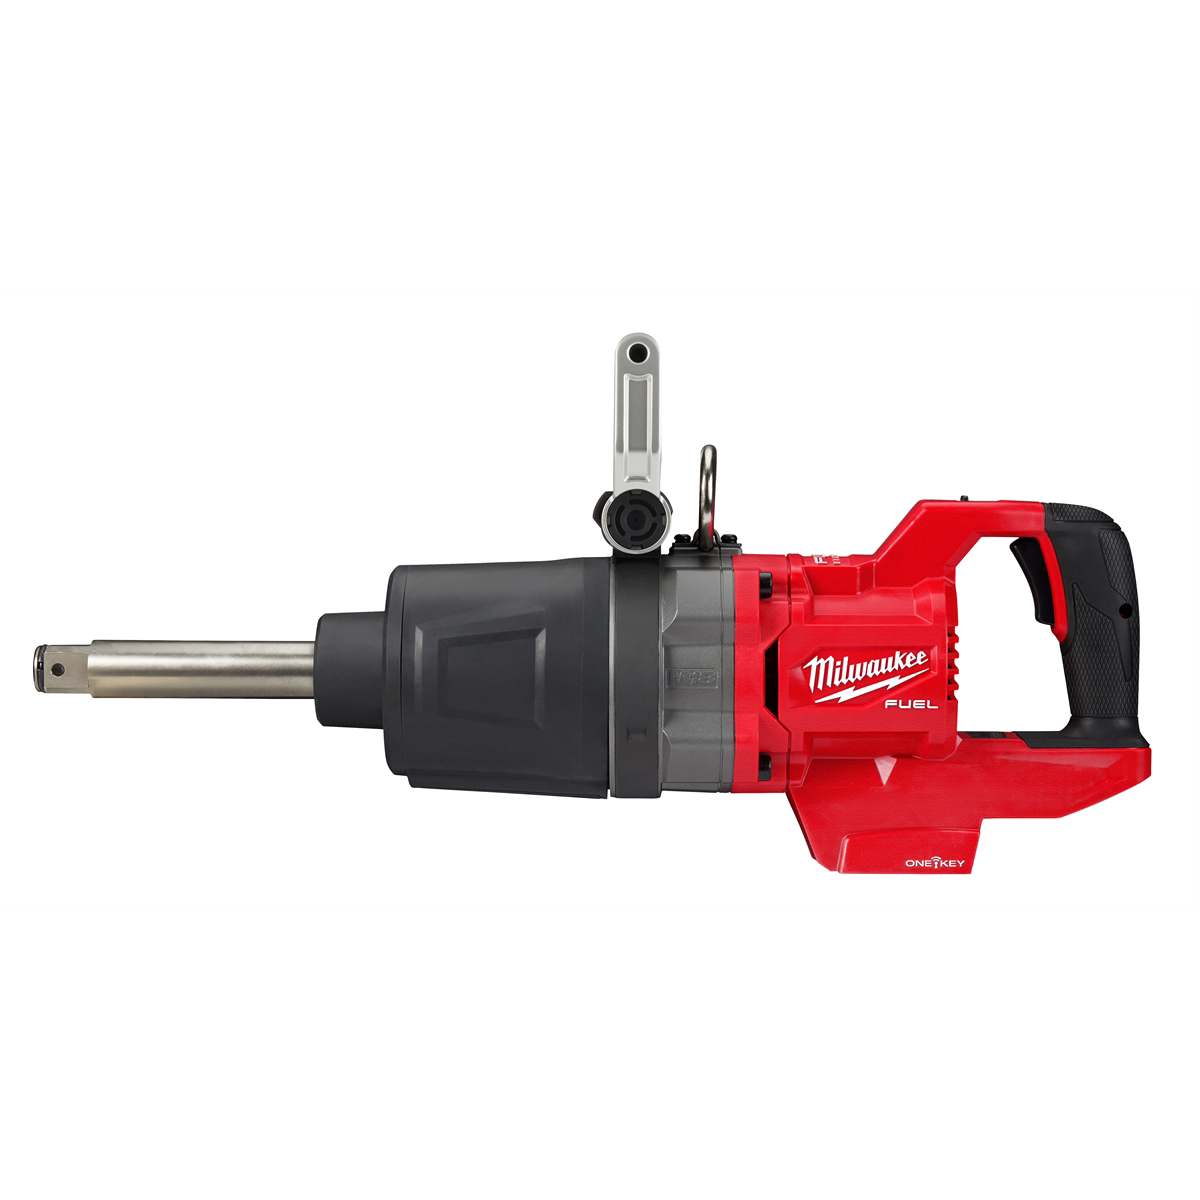 M18 FUEL 1in. D-HANDLE HTIW EXT. ANVIL BARE TOOL